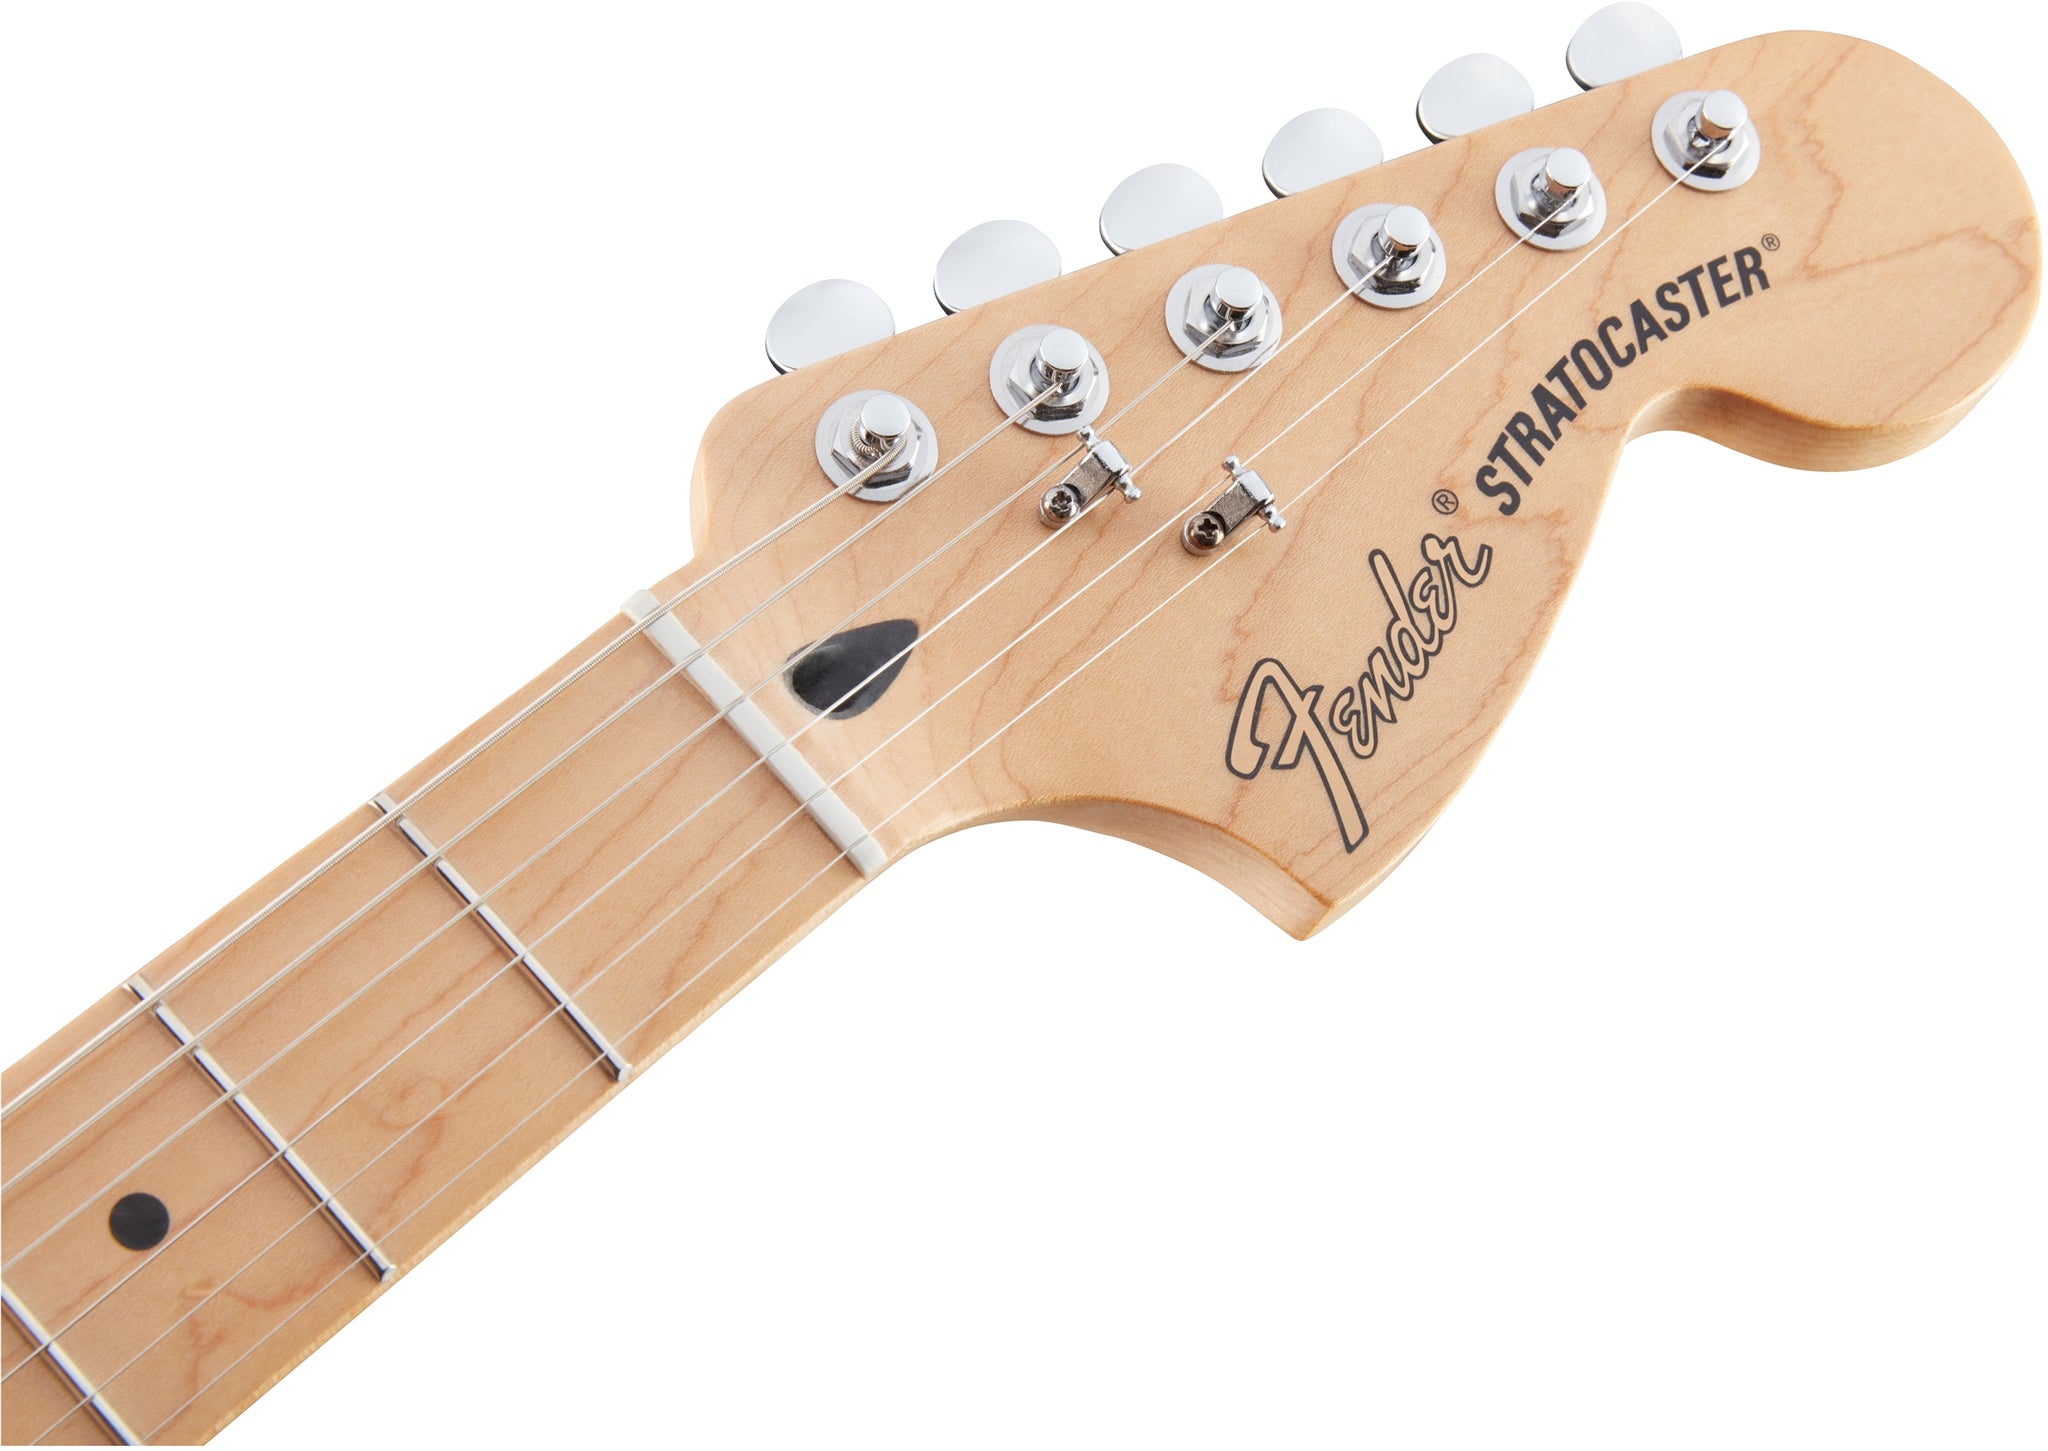 Fender Mexican Deluxe Roadhouse Stratocaster - Olympic White